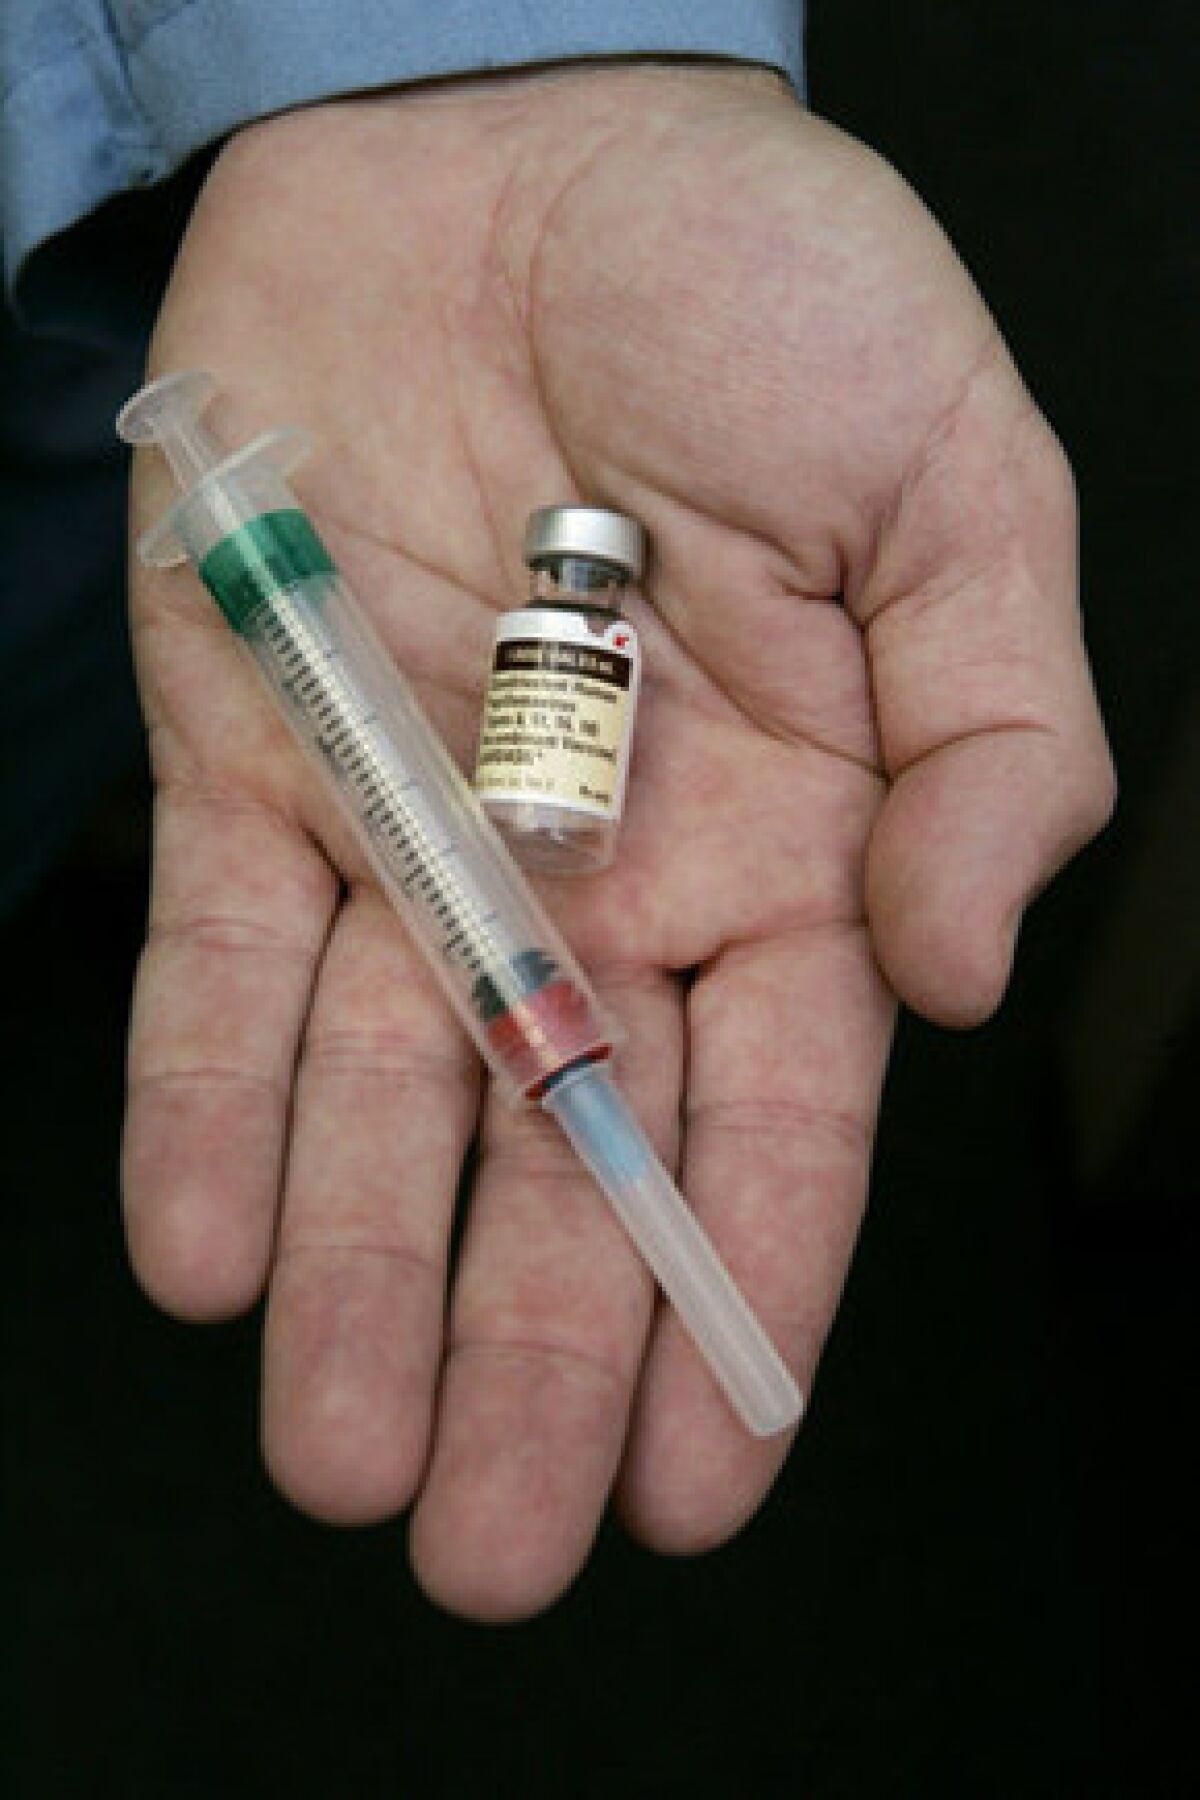 A physican holds the HPV vaccine Gardasil. The vaccine prevents infections from four strains of the sexually transmitted human papillomavirus, which are responsible for nearly all cases of cervical cancer.